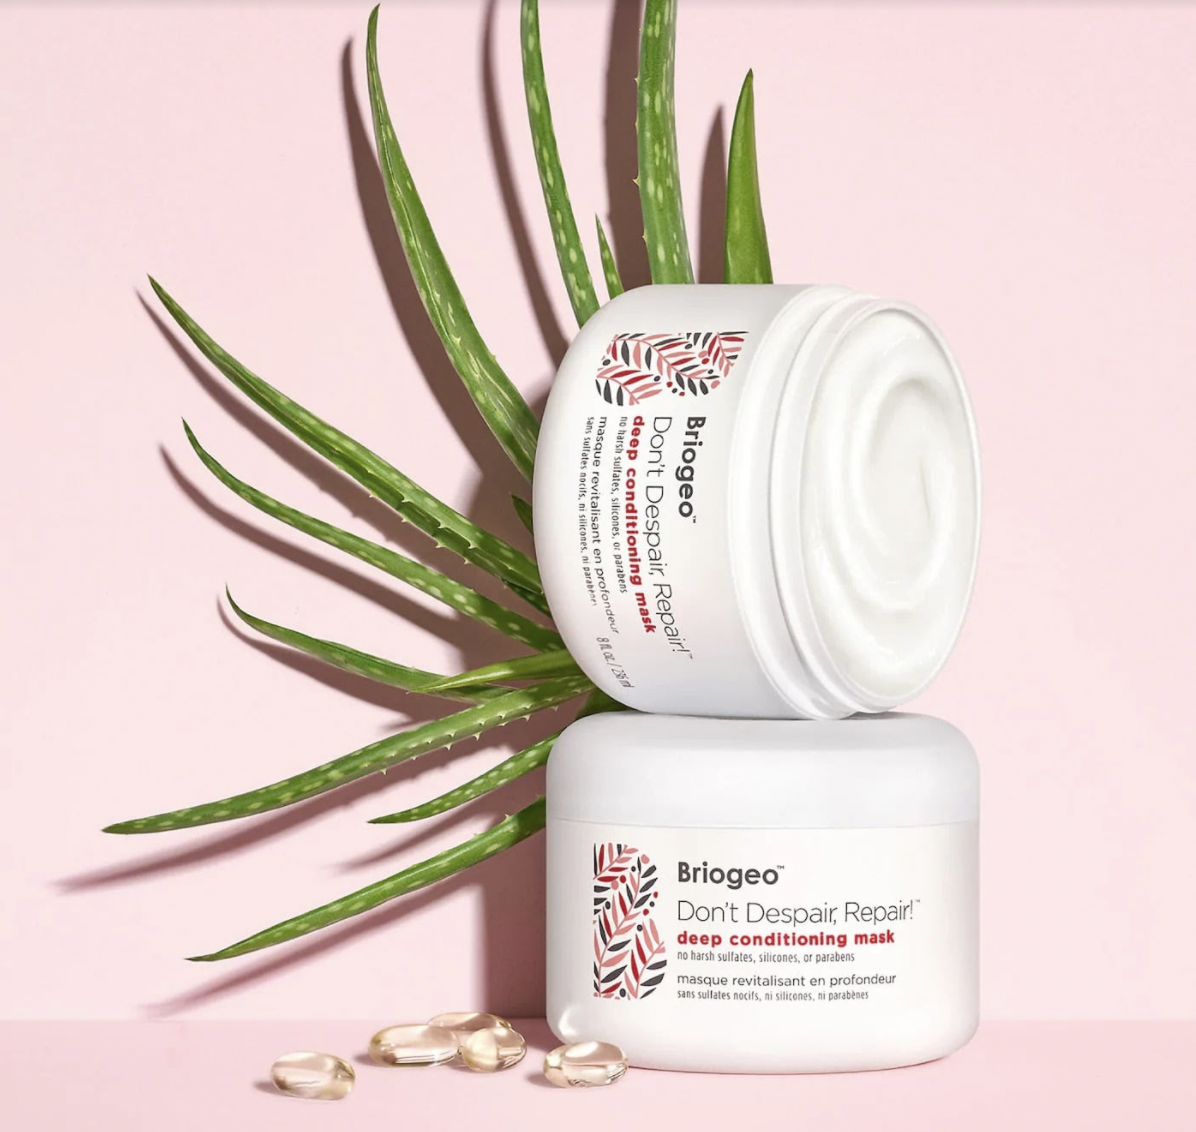 Two tins of the Don’t Despair Repair! Deep Conditioning Mask, a viral TikTok product from Briogeo, with an aloe plant. 